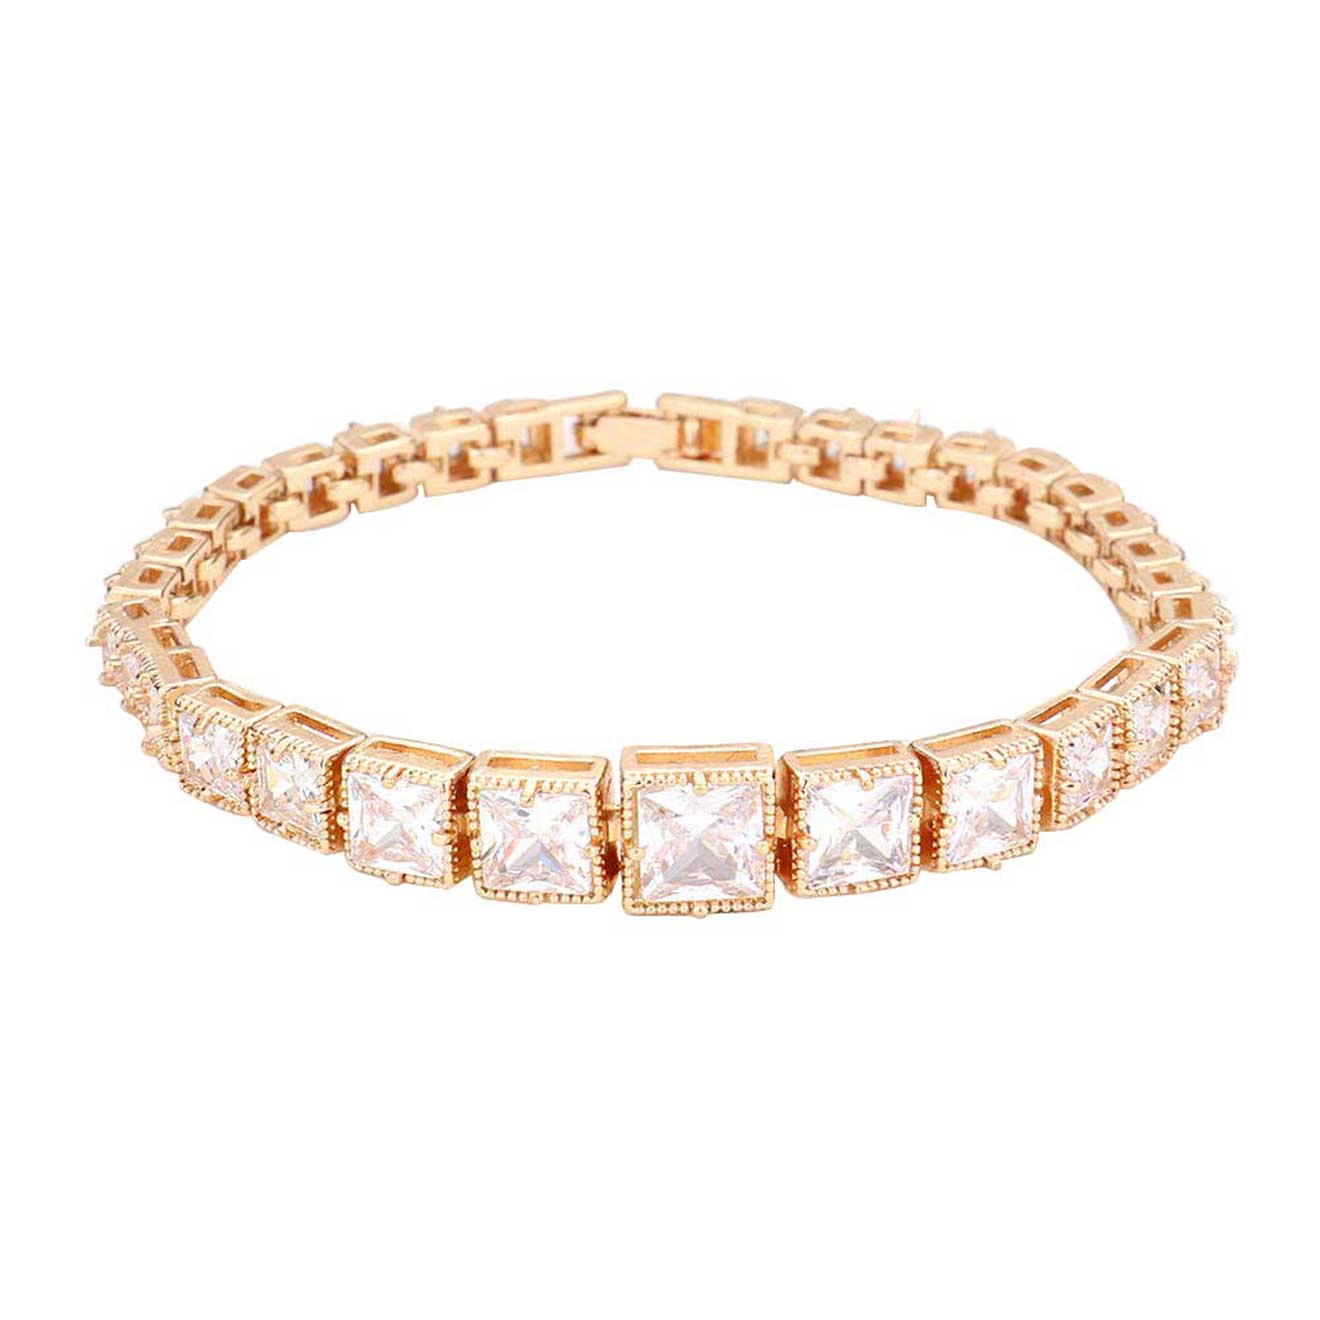 Gold CZ Square Cluster Evening Bracelet, put on a pop of color to complete your ensemble. Perfect for adding just the right amount of shimmer & shine and a touch of class to special events. Perfect Birthday Gift, Anniversary Gift, Mother's Day Gift, Graduation Gift, Prom Jewelry, Thank you Gift.